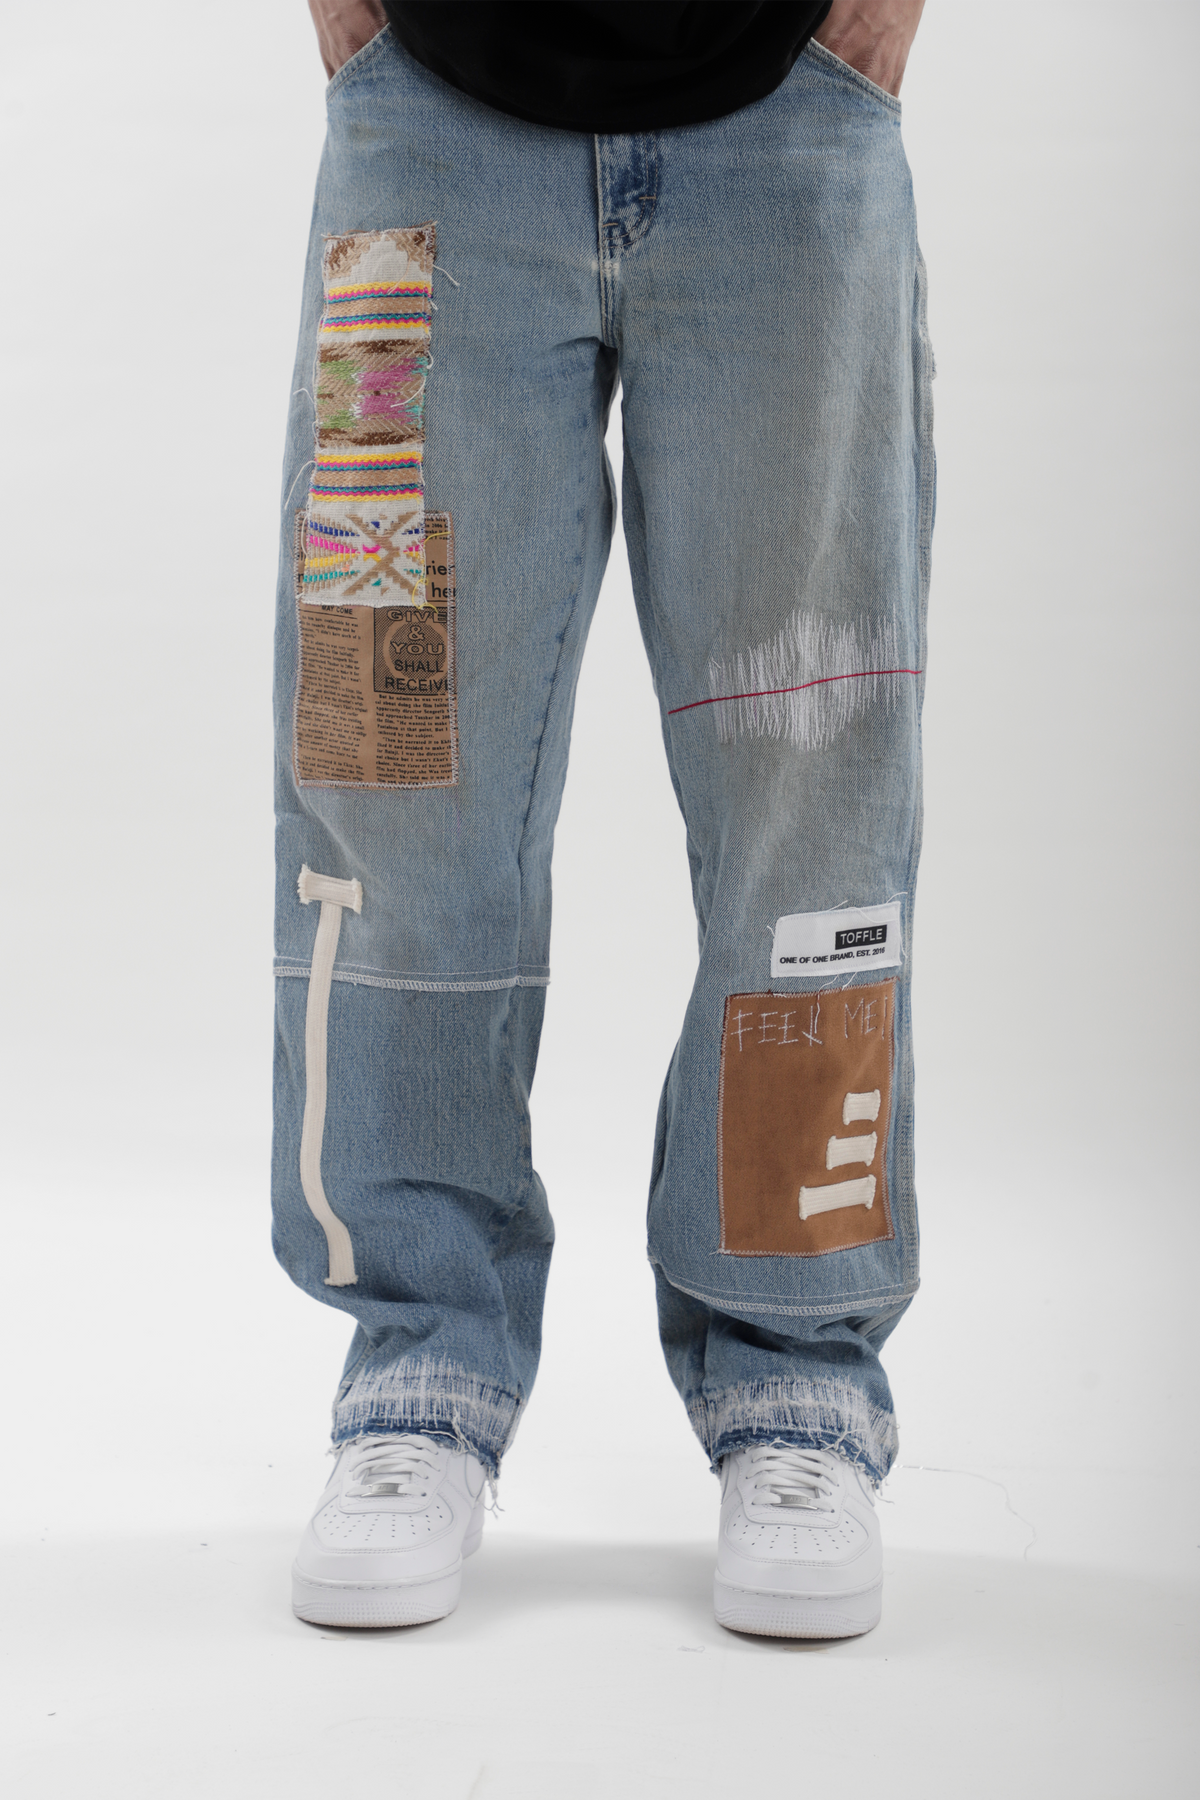 Earthtone Blue Denim Jeans, a product by TOFFLE